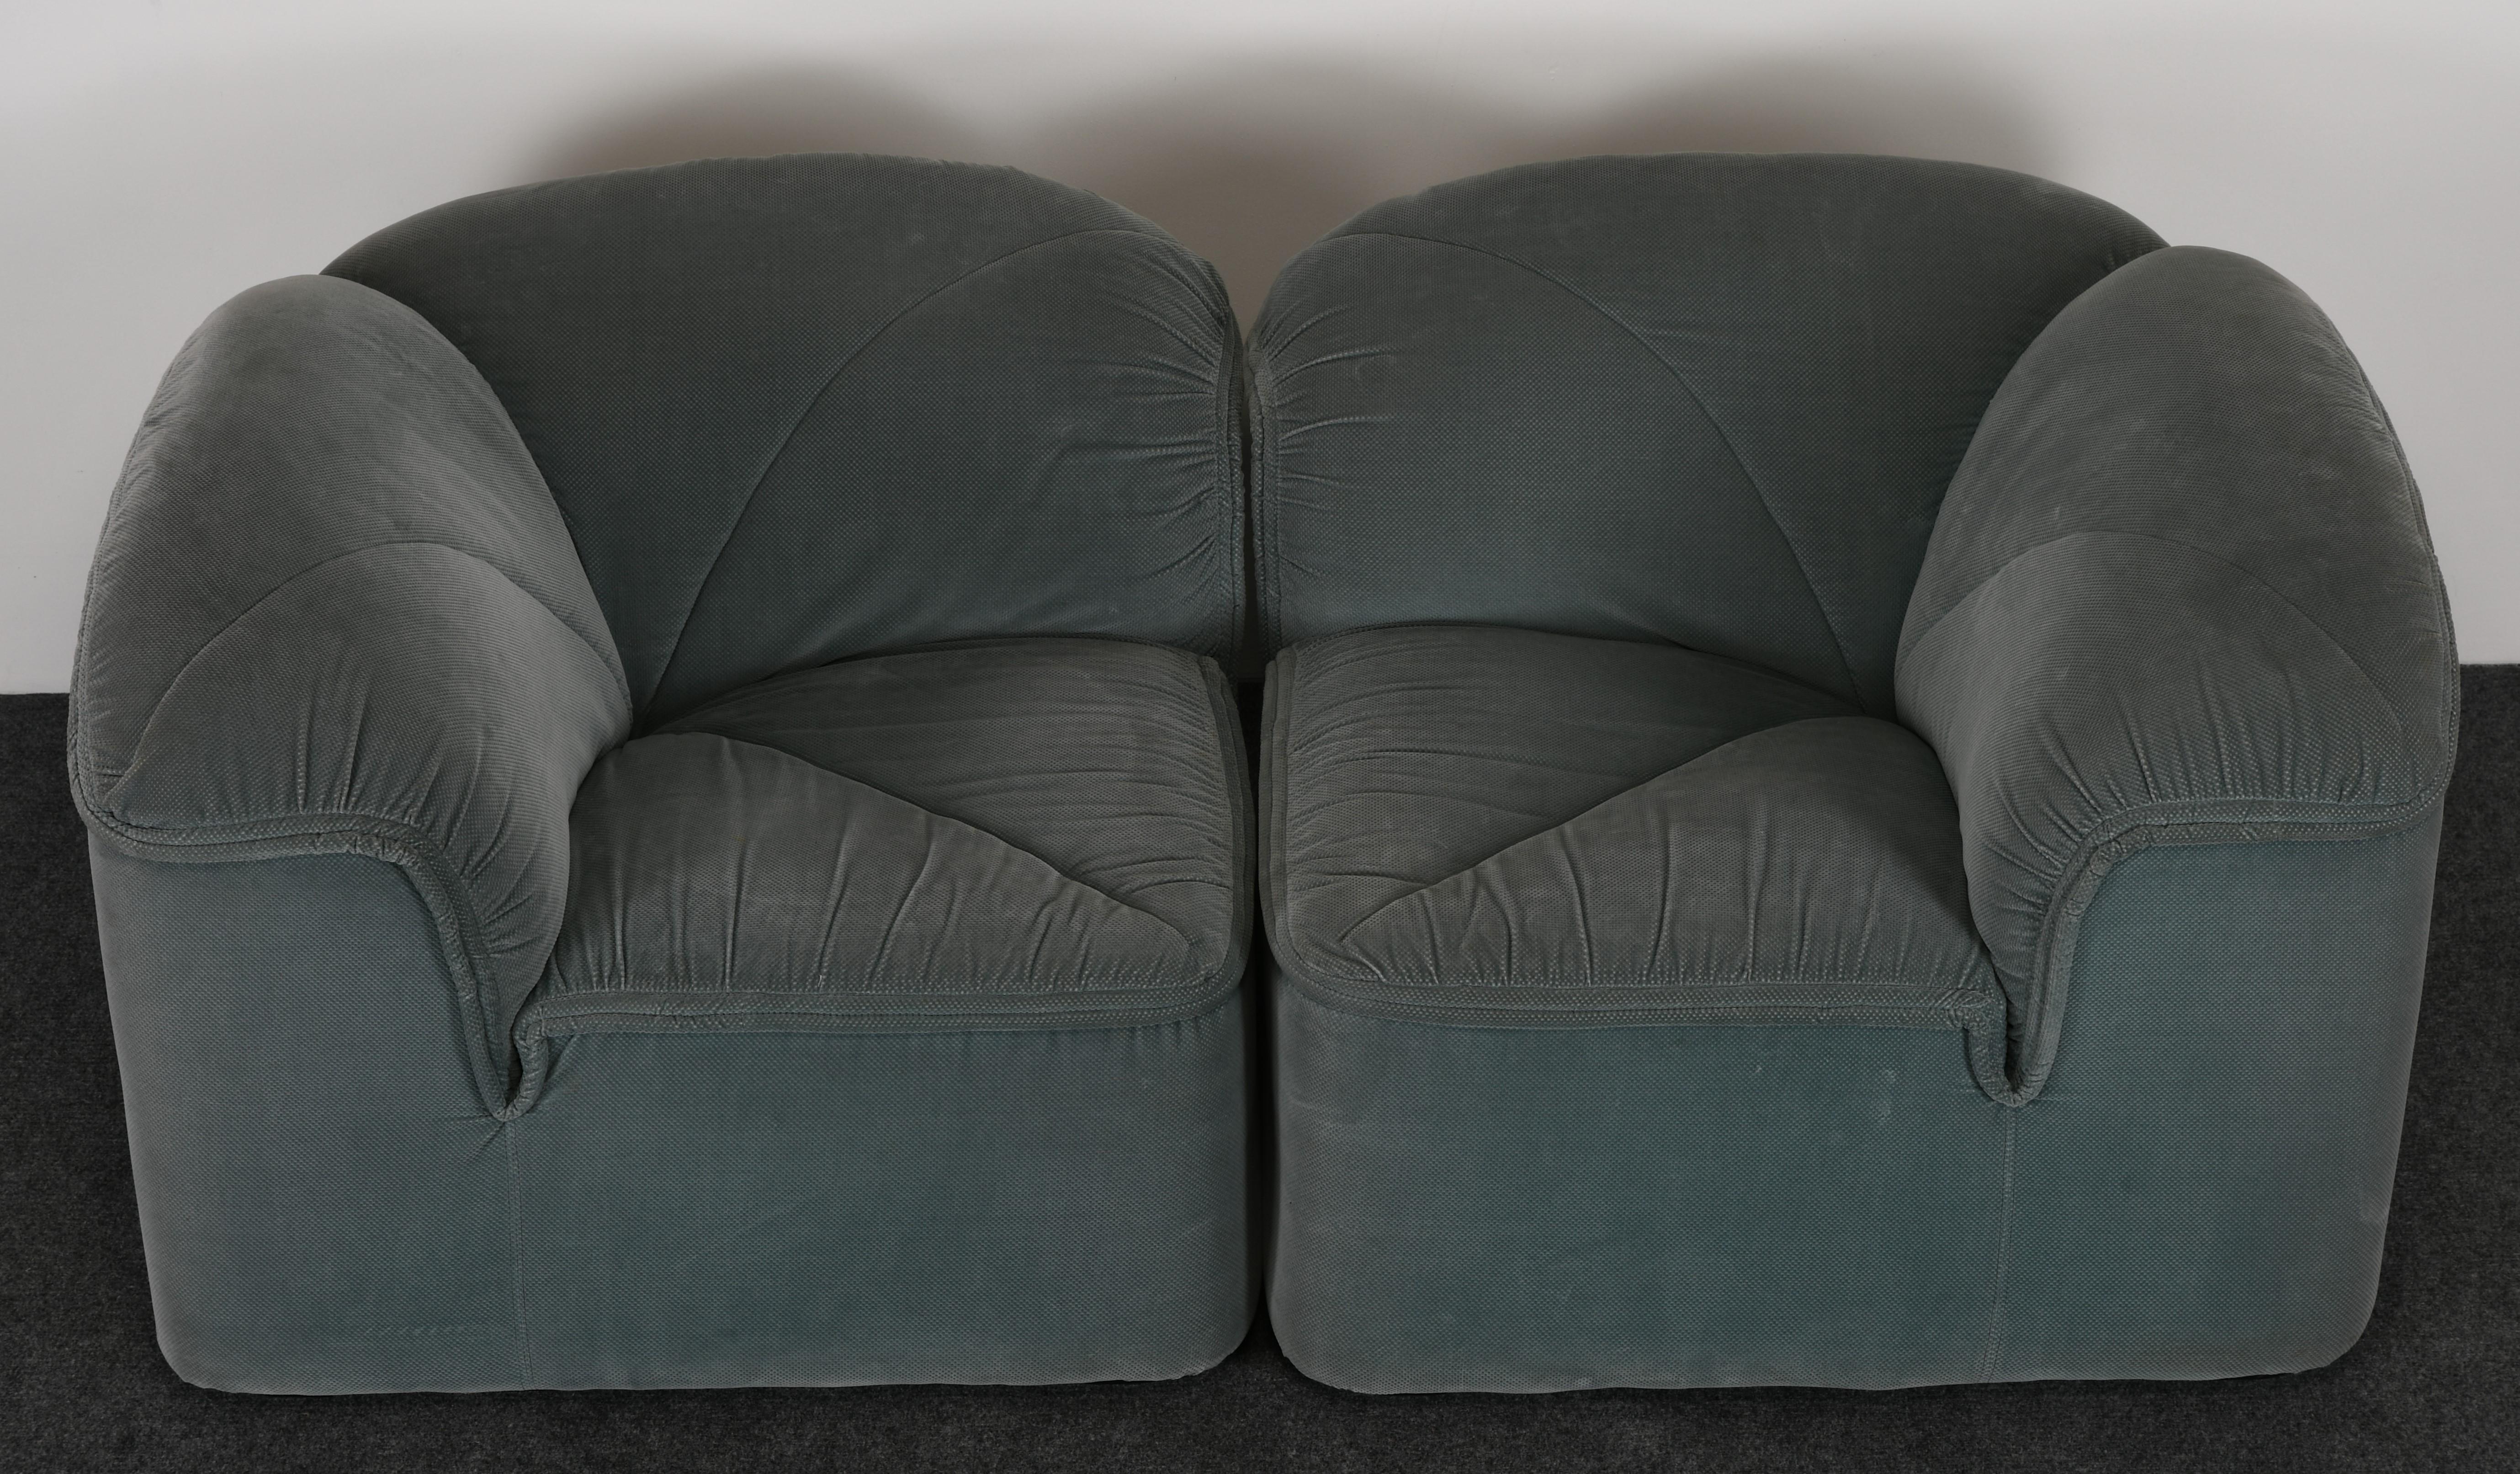 Late 20th Century Pair of Mariani Lounge Chairs for Pace Collection, Inc., 1970s